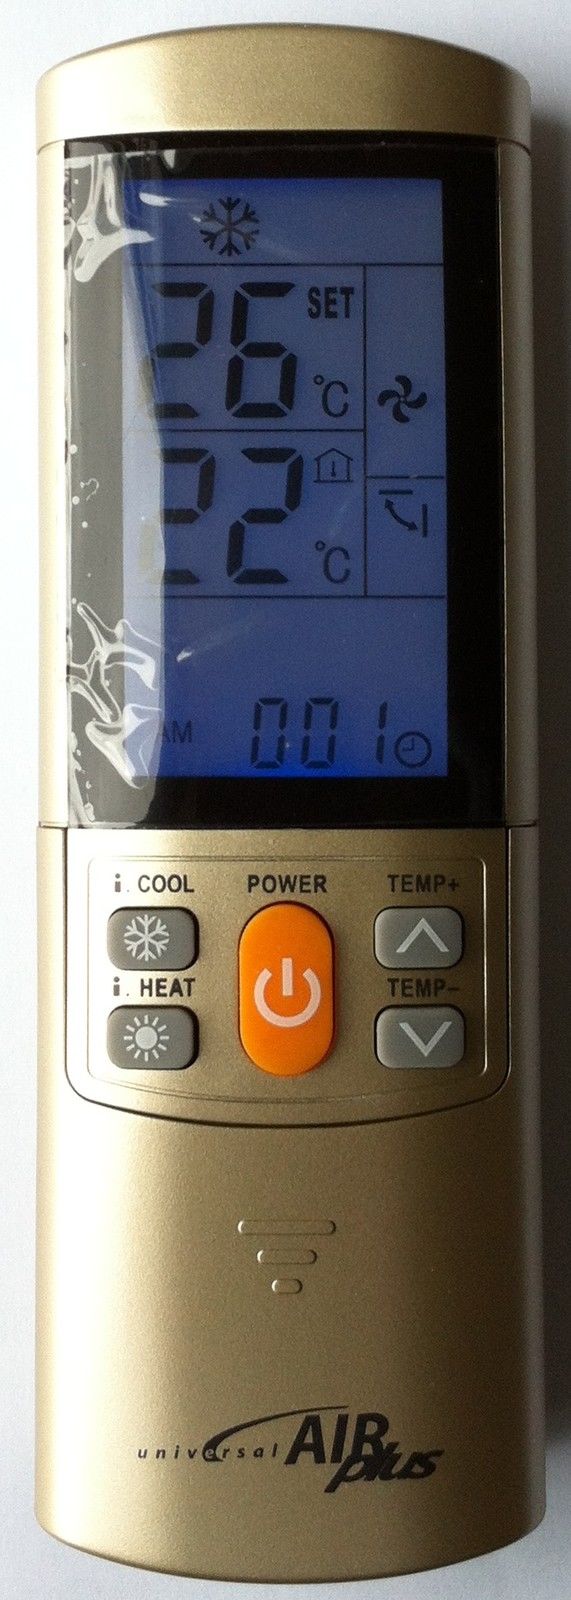 GENERAL ELECTRIC REPLACEMENT UNIVERSAL AIR CONDITIONER REMOTE CONTROL - GENERAL ELECTRIC AIR CON FULL FUNCTION